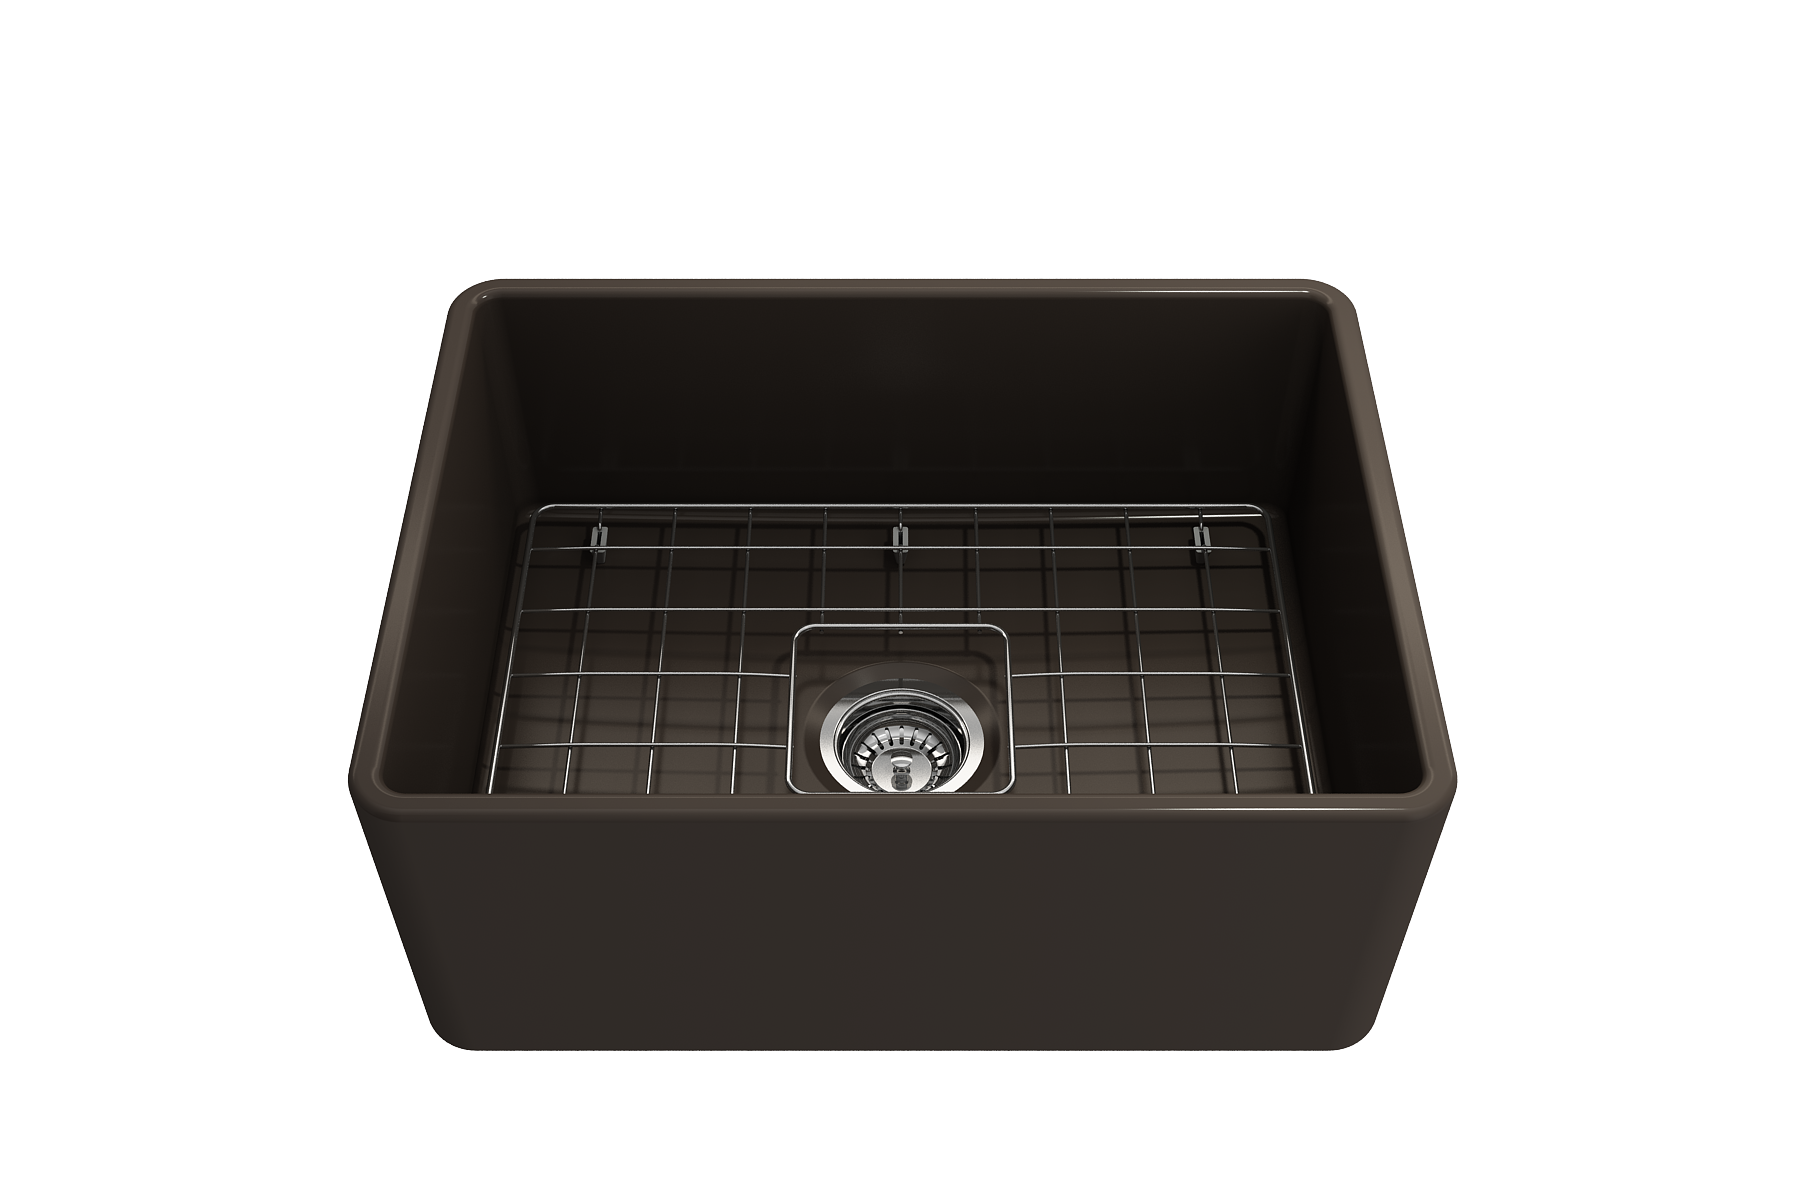 Bocchi Classico Farmhouse Apron Front Fireclay 24" Single Bowl Kitchen Sink with Protective Bottom Grid and Strainer, Available in 9 colors!